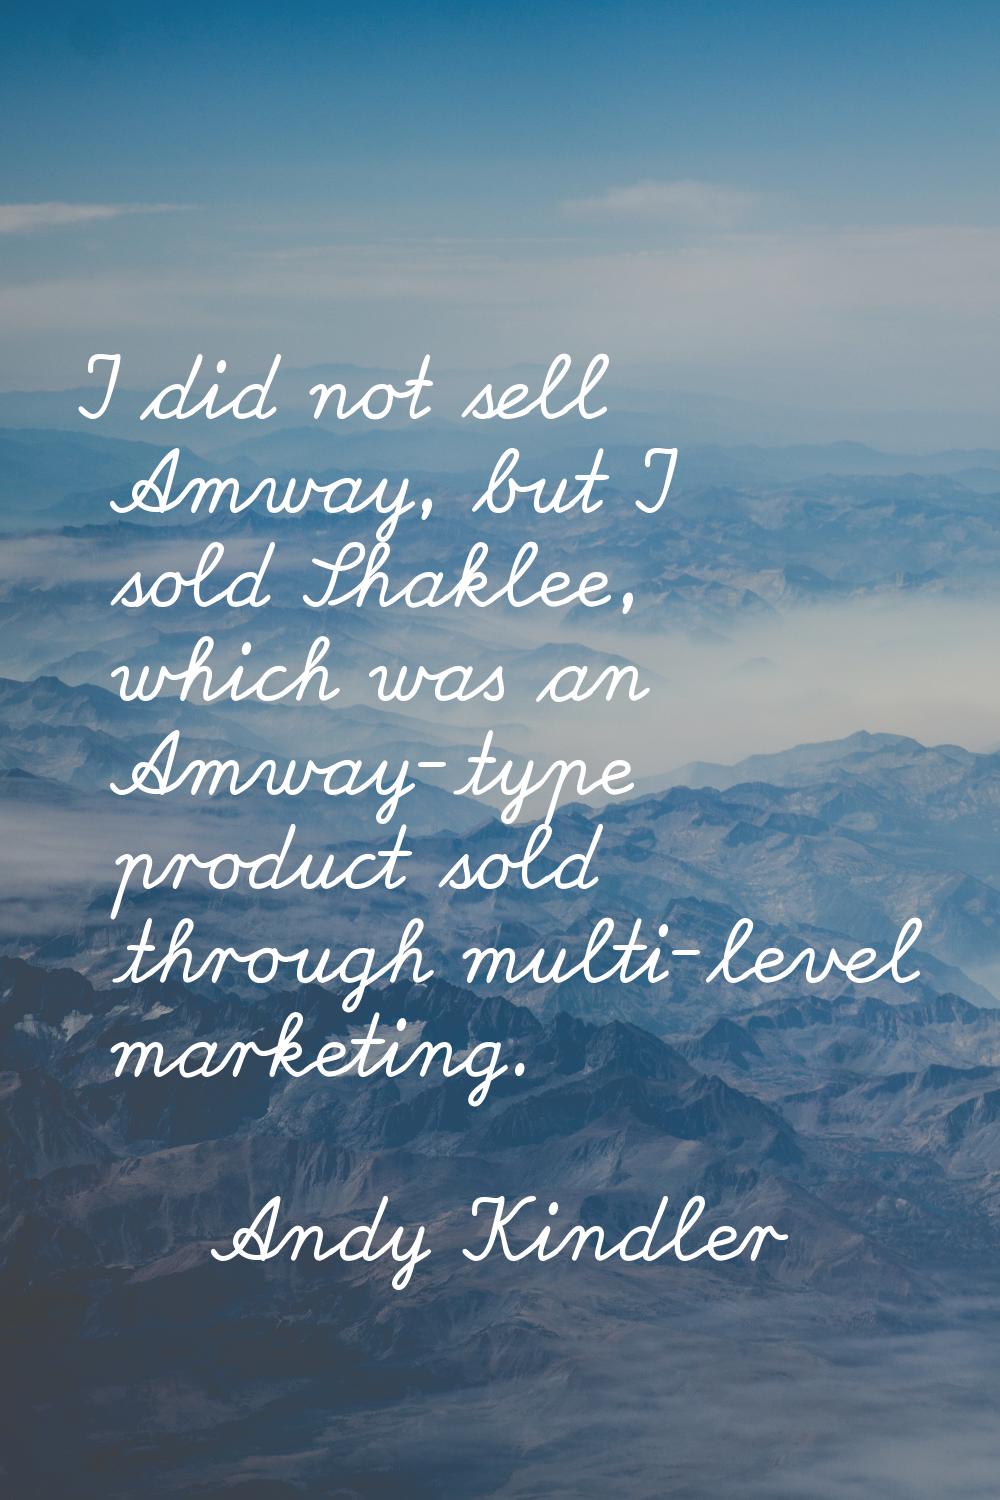 I did not sell Amway, but I sold Shaklee, which was an Amway-type product sold through multi-level 